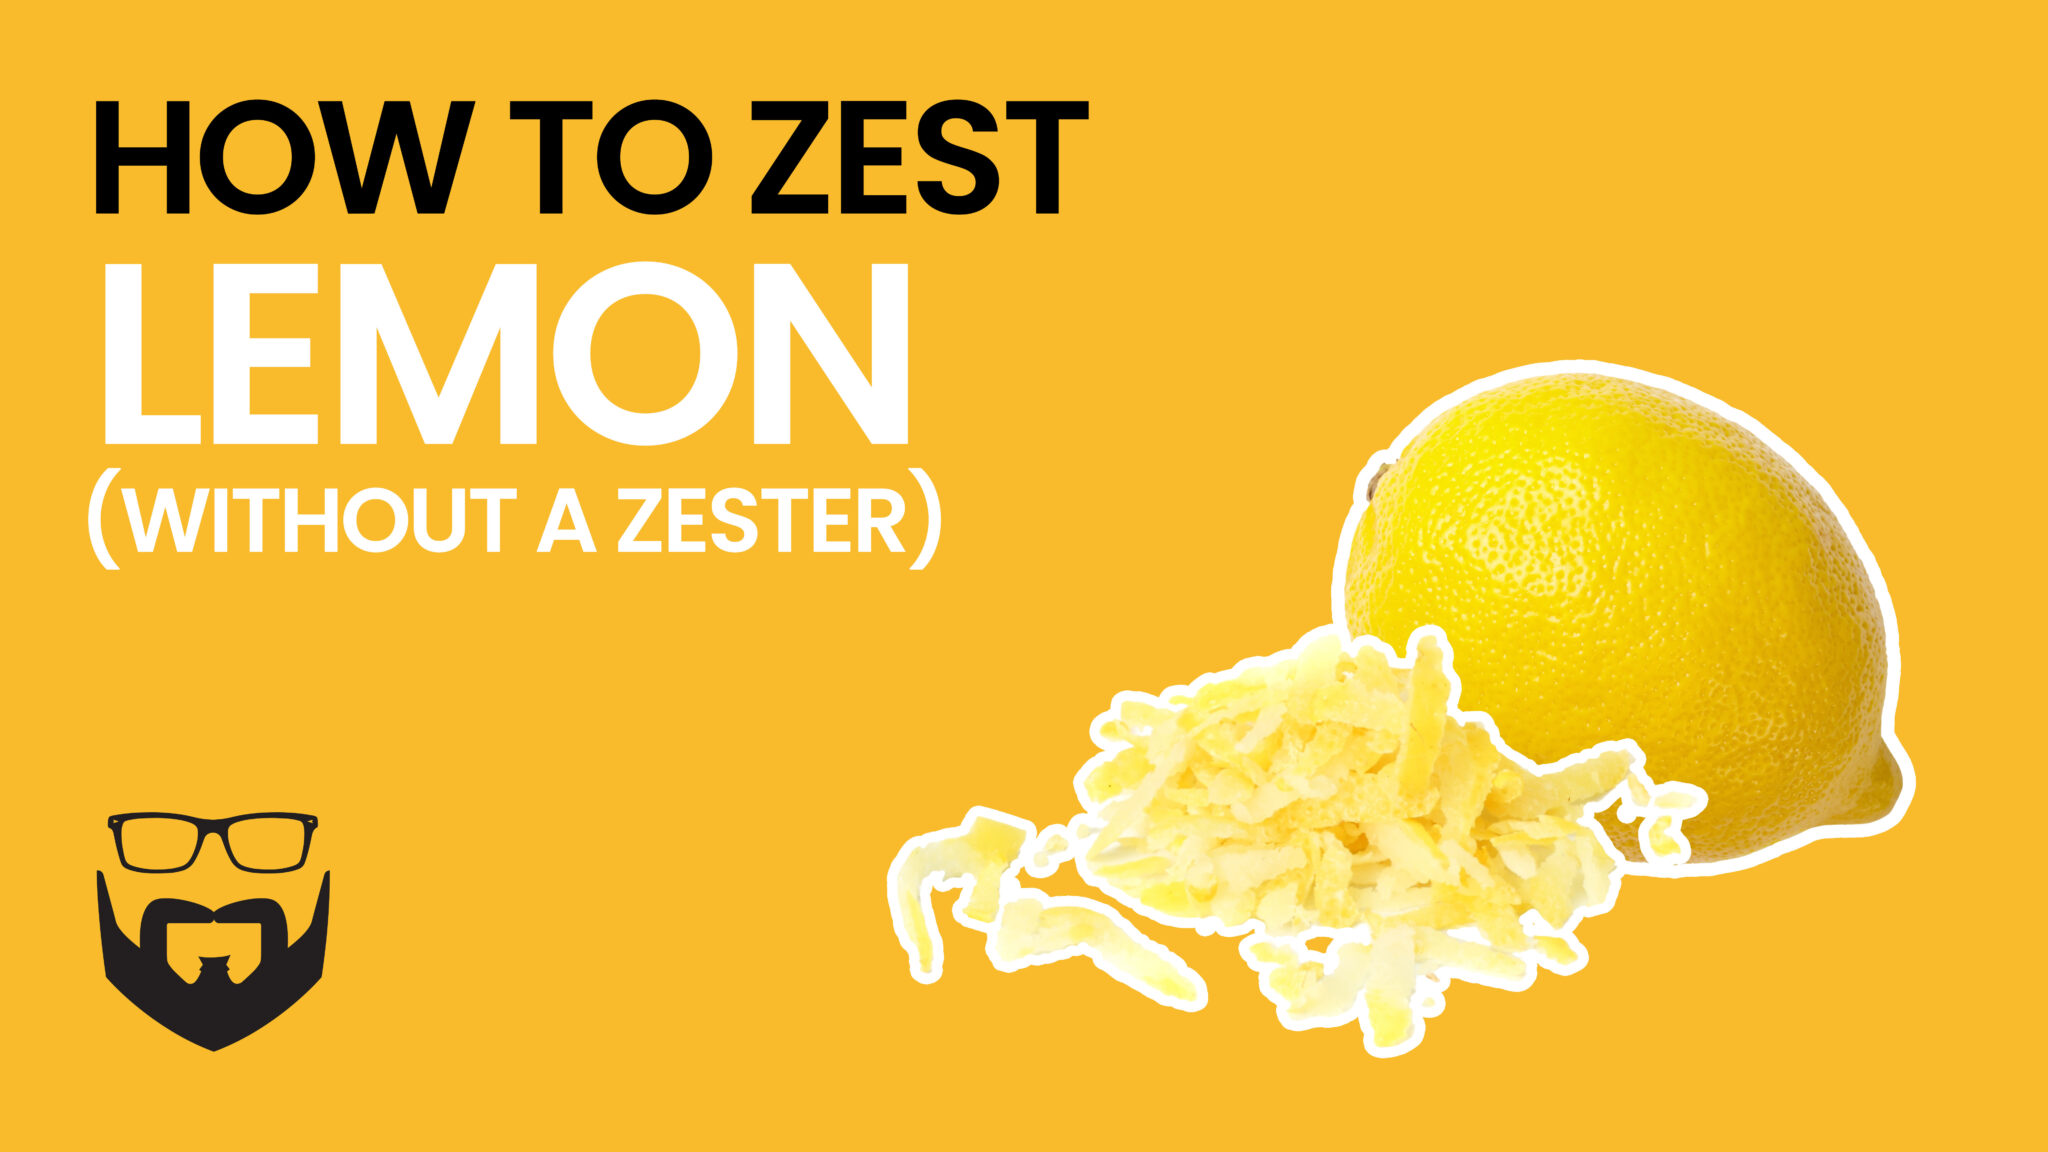 How to Zest Lemon Without a Zester Video - Yellow